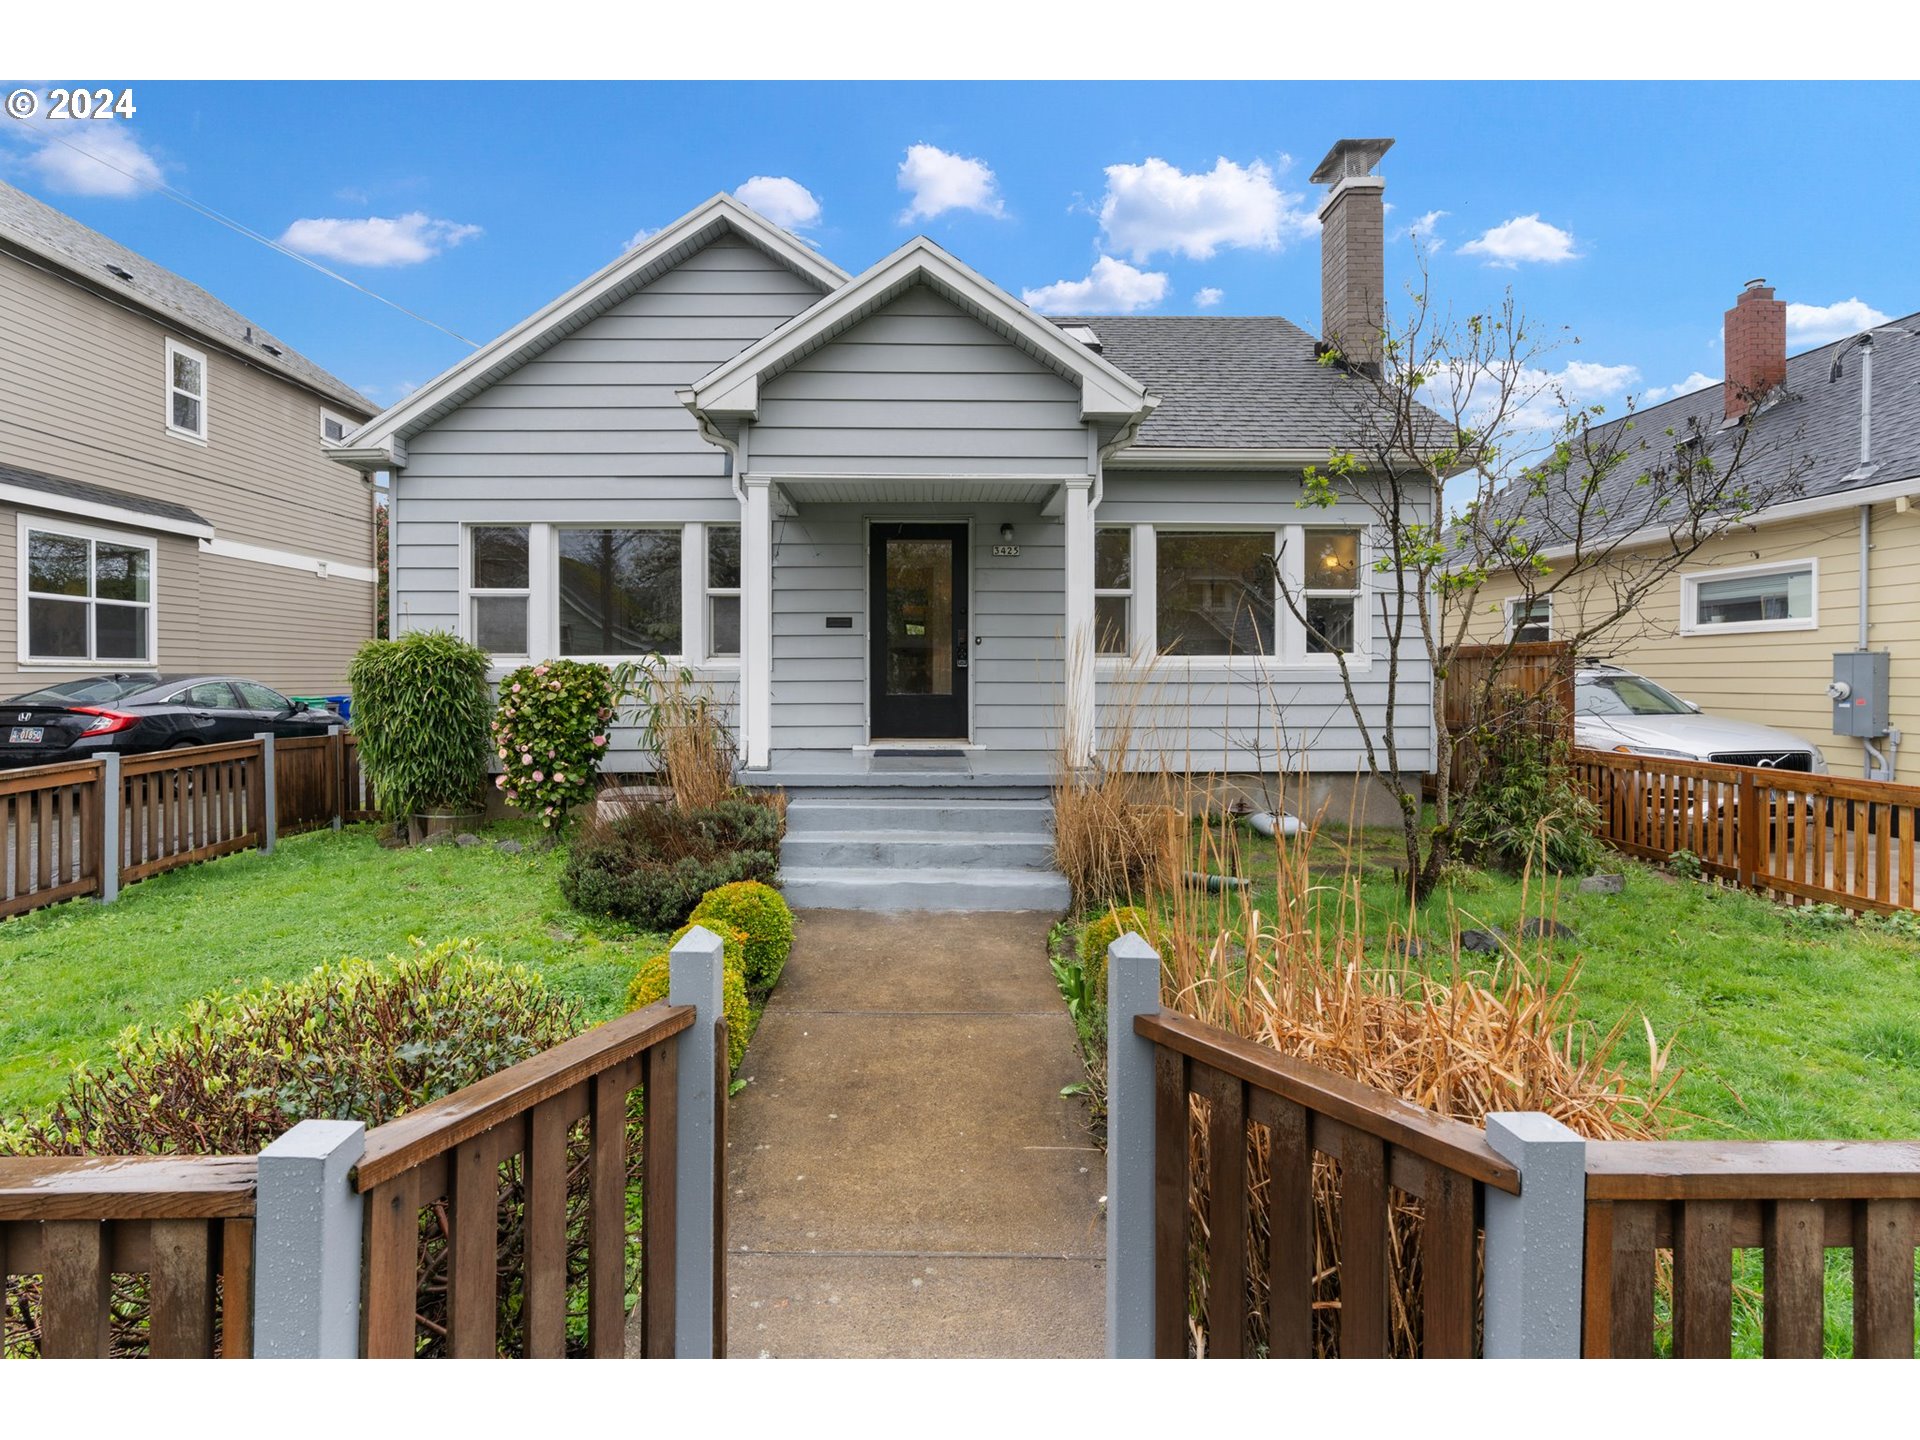 **Open Houses** Friday 3/29 4pm-6pm and Saturday 3/30 11am-1pm. Check me out! This darling bungalow has all the vintage vibe and charm you are looking for right in the heart of NE Portland. Located in the Rose City Park neighborhood, the home is just blocks to all that Beaumont Village has to offer including local shops, cafes, bars and services. Live the Portland lifestyle and sip your morning coffee on the front stoop or entertain friends on the fabulous deck in the backyard. Step back in time with these 1920s features: beautiful wood floors, sexy fireplace with built-in and original picture rail. The functional floor plan has an open living/dining room divided by a charming archway. Through the dining room is the kitchen with stainless steel appliances, breakfast nook and side door to deck, backyard and driveway. Upstairs you?ll find a large light-filled bedroom with skylights plus loft perfect for your office or hobby needs. On the main is the second bedroom with back deck access and full bath. The unfinished basement has washer/dryer, utility sink and plenty of space for storage or a workshop. Picture PNW summers on the oversized back deck and create your own private oasis in the fully fenced backyard. Need more storage? There is a detached garage at the end of the shared driveway for all your adventure gear. Stroll the sweet neighborhood streets as you mosy to local businesses like Jim + Patty?s Coffee, Fire on the Mountain for wings, Blackbird for wine and cheese or Pip?s donuts for tasty treats. [Home Energy Score = 3. HES Report at https://rpt.greenbuildingregistry.com/hes/OR10226088]